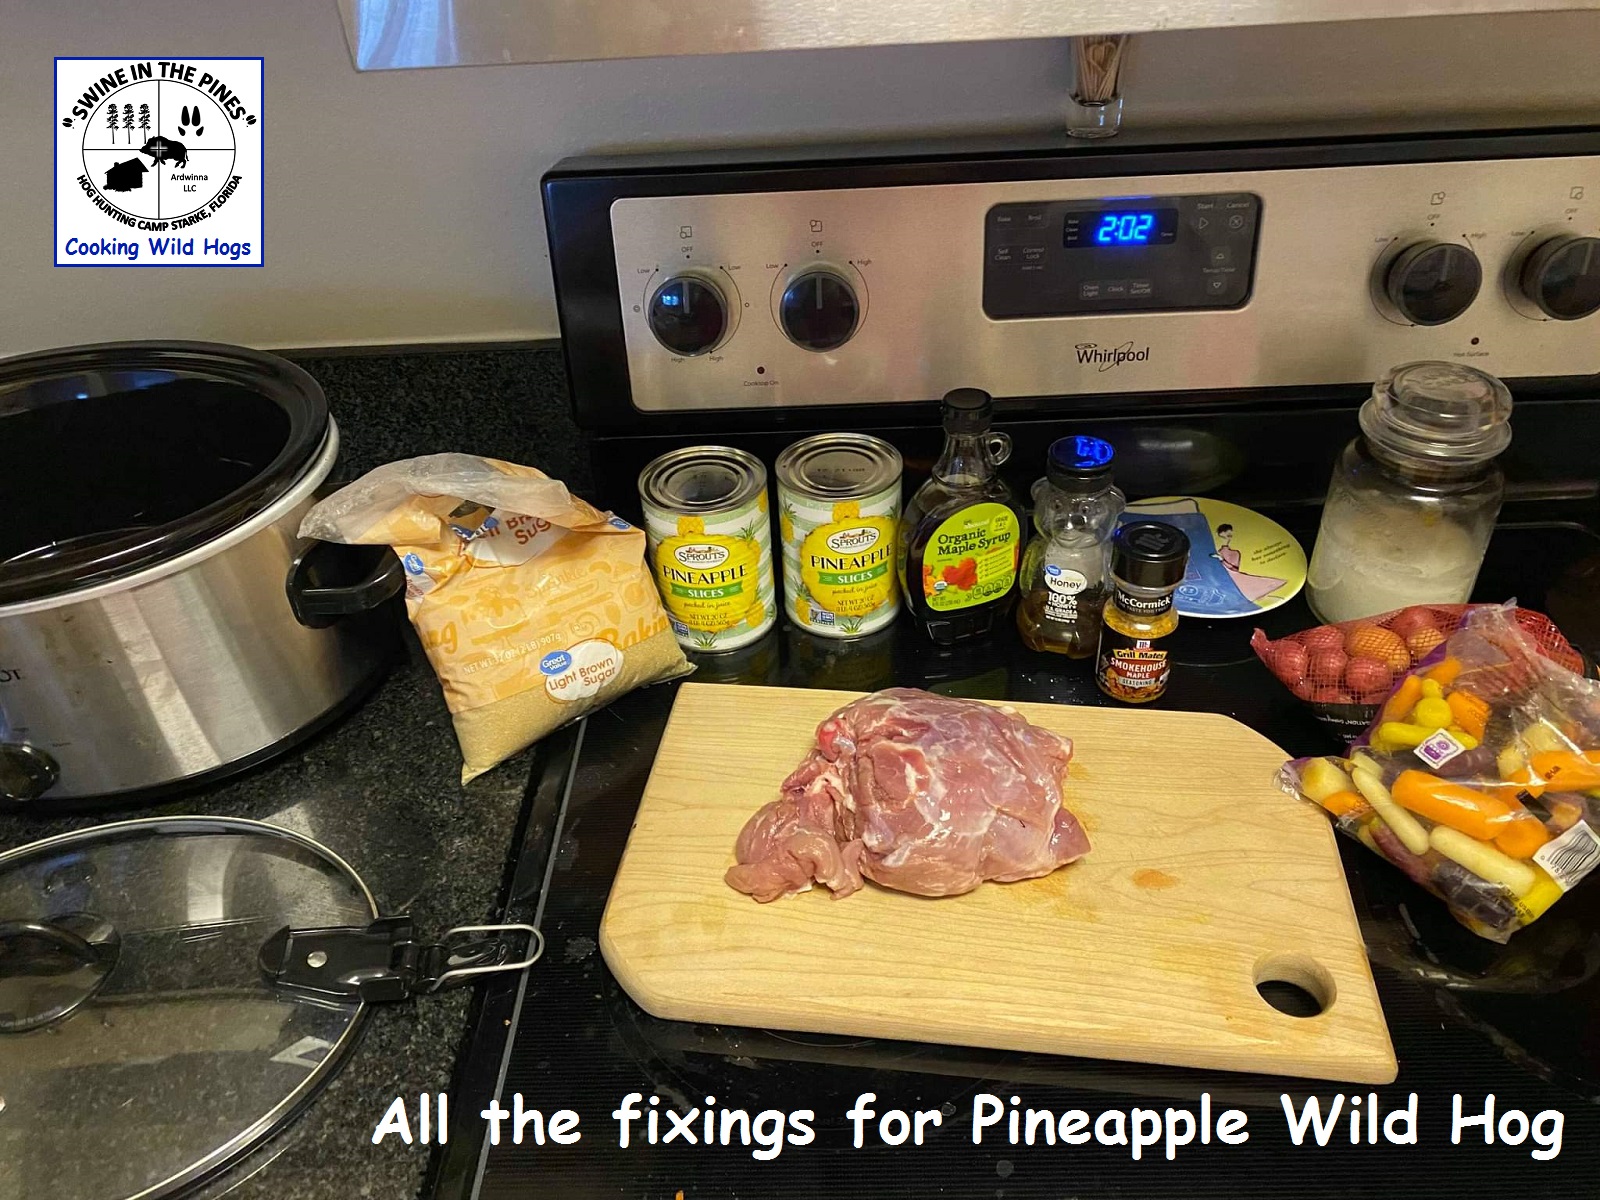 All the fixings for Pineapple Wild Hog